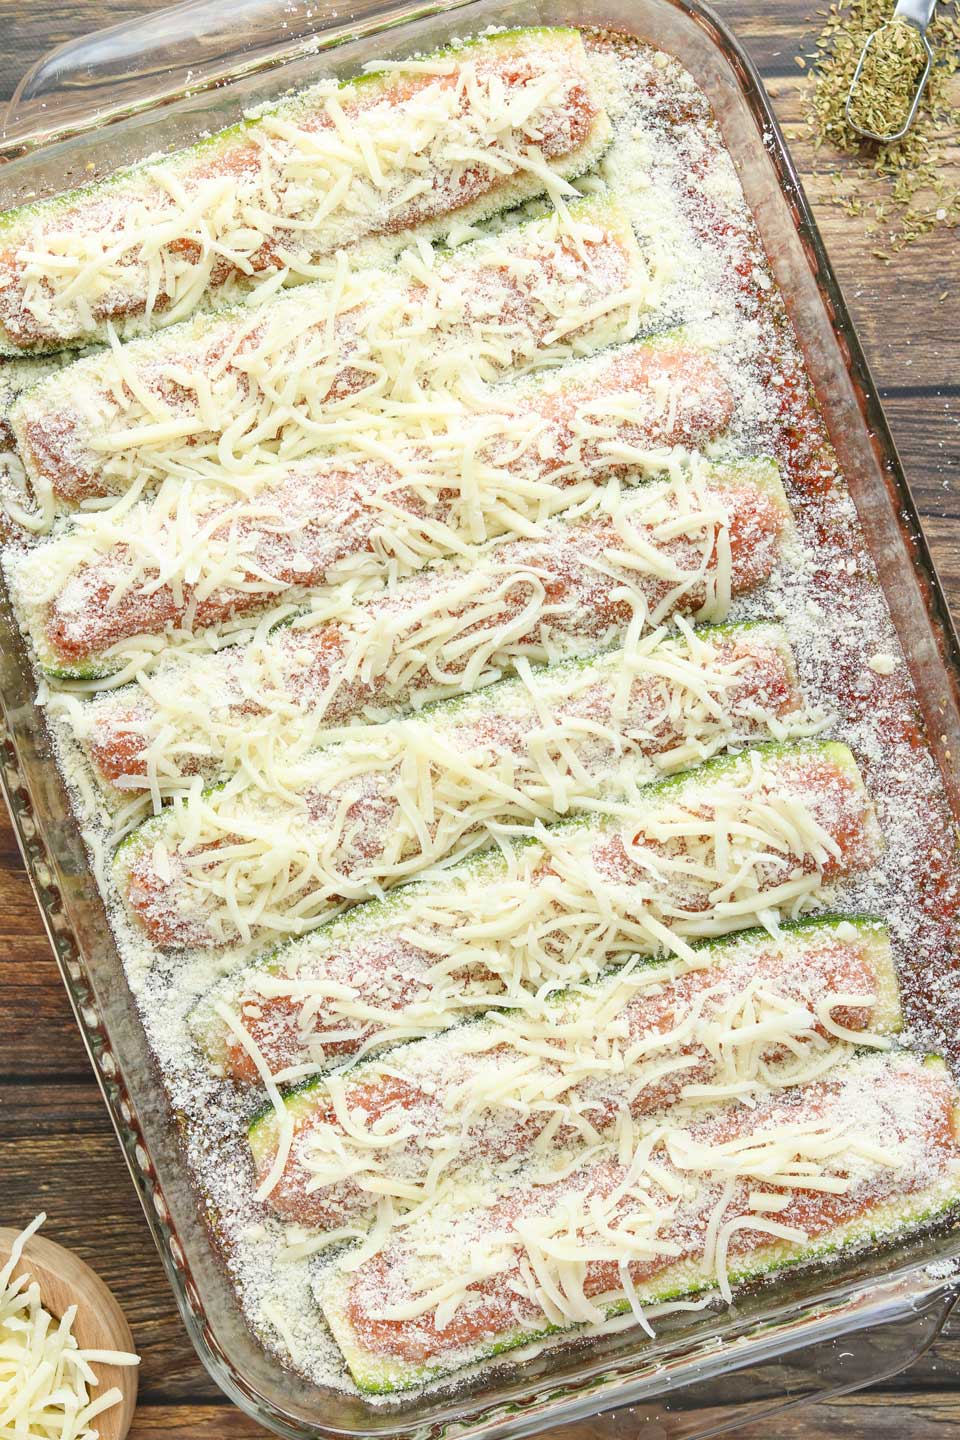 Just before baking this zucchini casserole, we layer on a delicious mix of Italian cheeses. They turn ooey-gooey golden brown in the oven – the perfect topping for our sausage-stuffed zucchini boats!